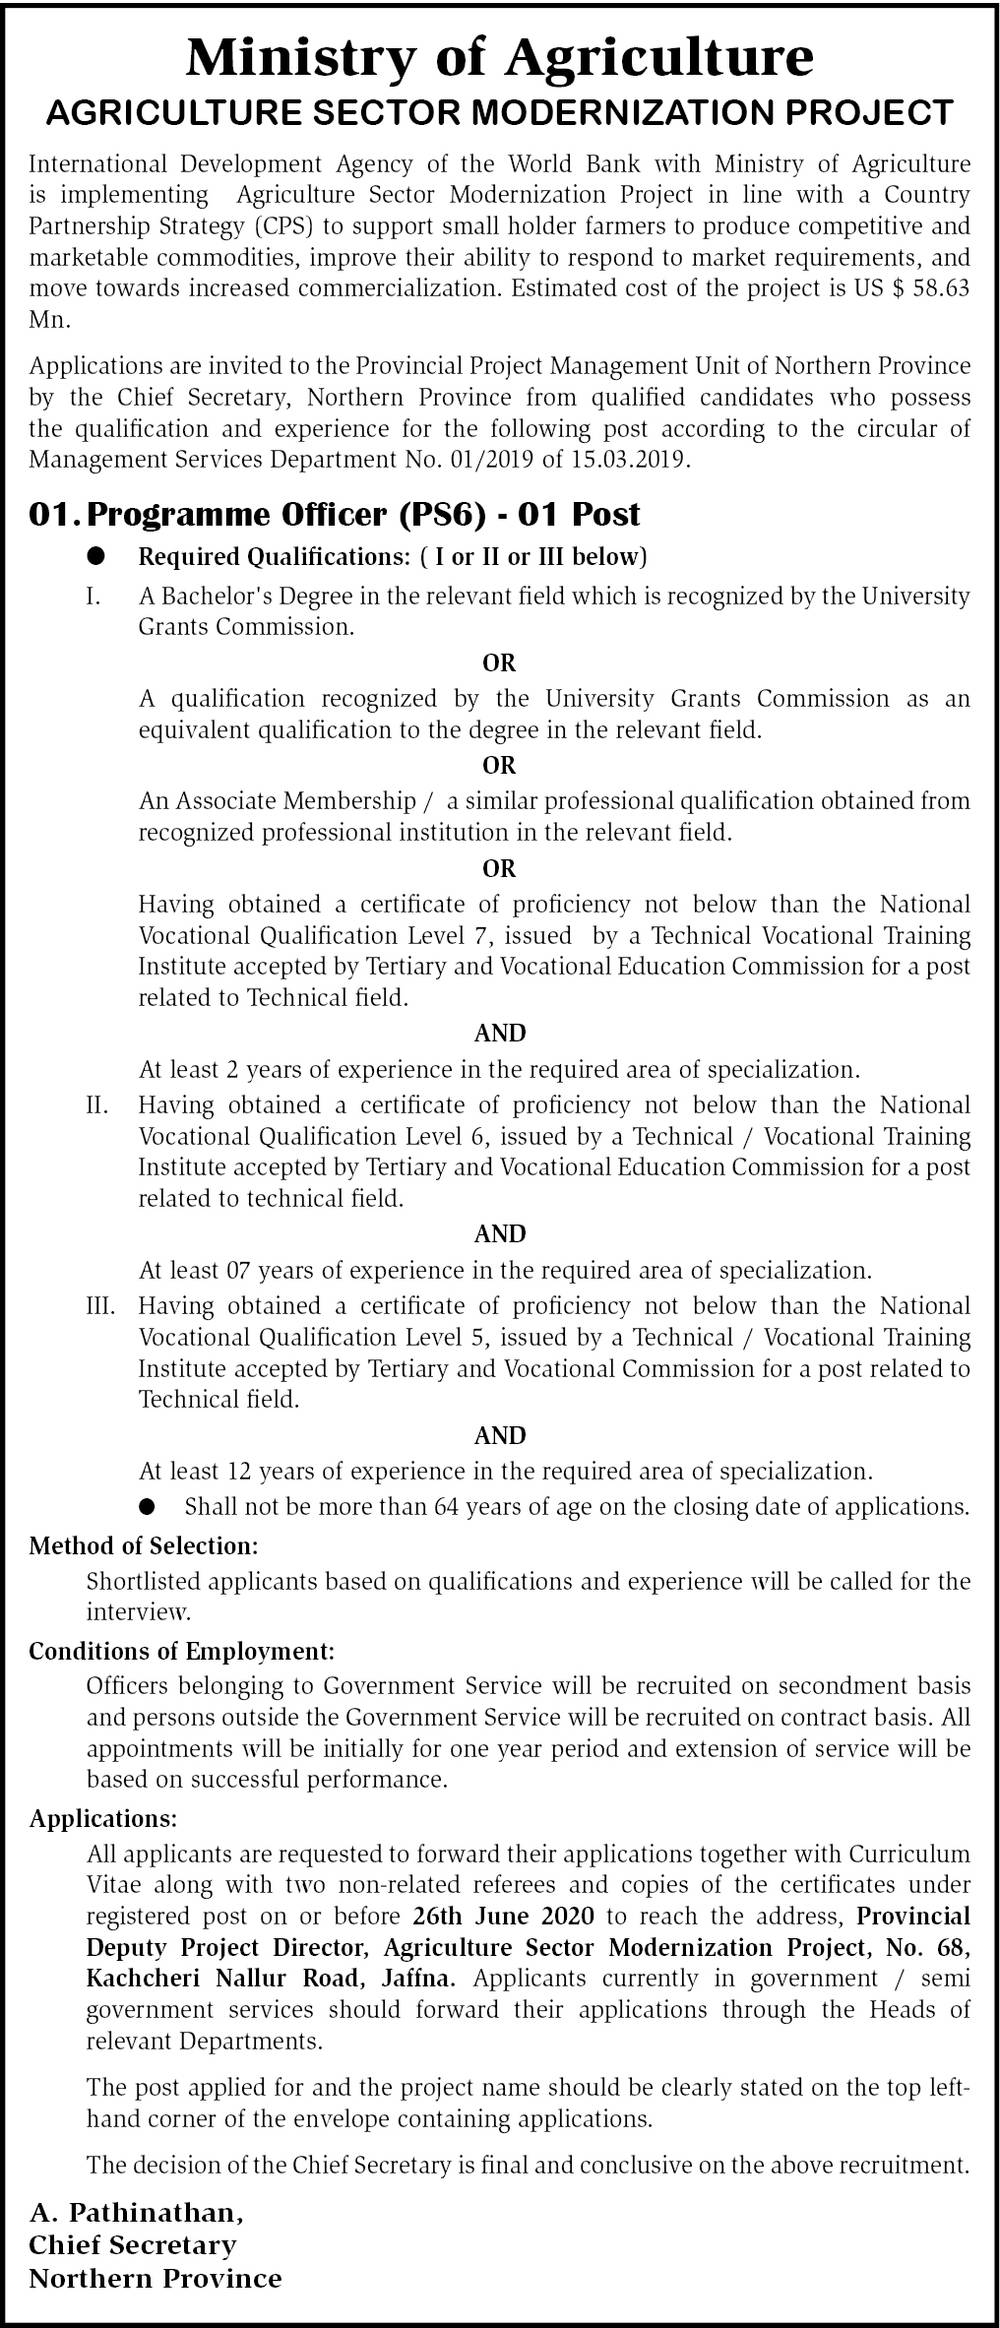 Programme Officer - Ministry of Agriculture